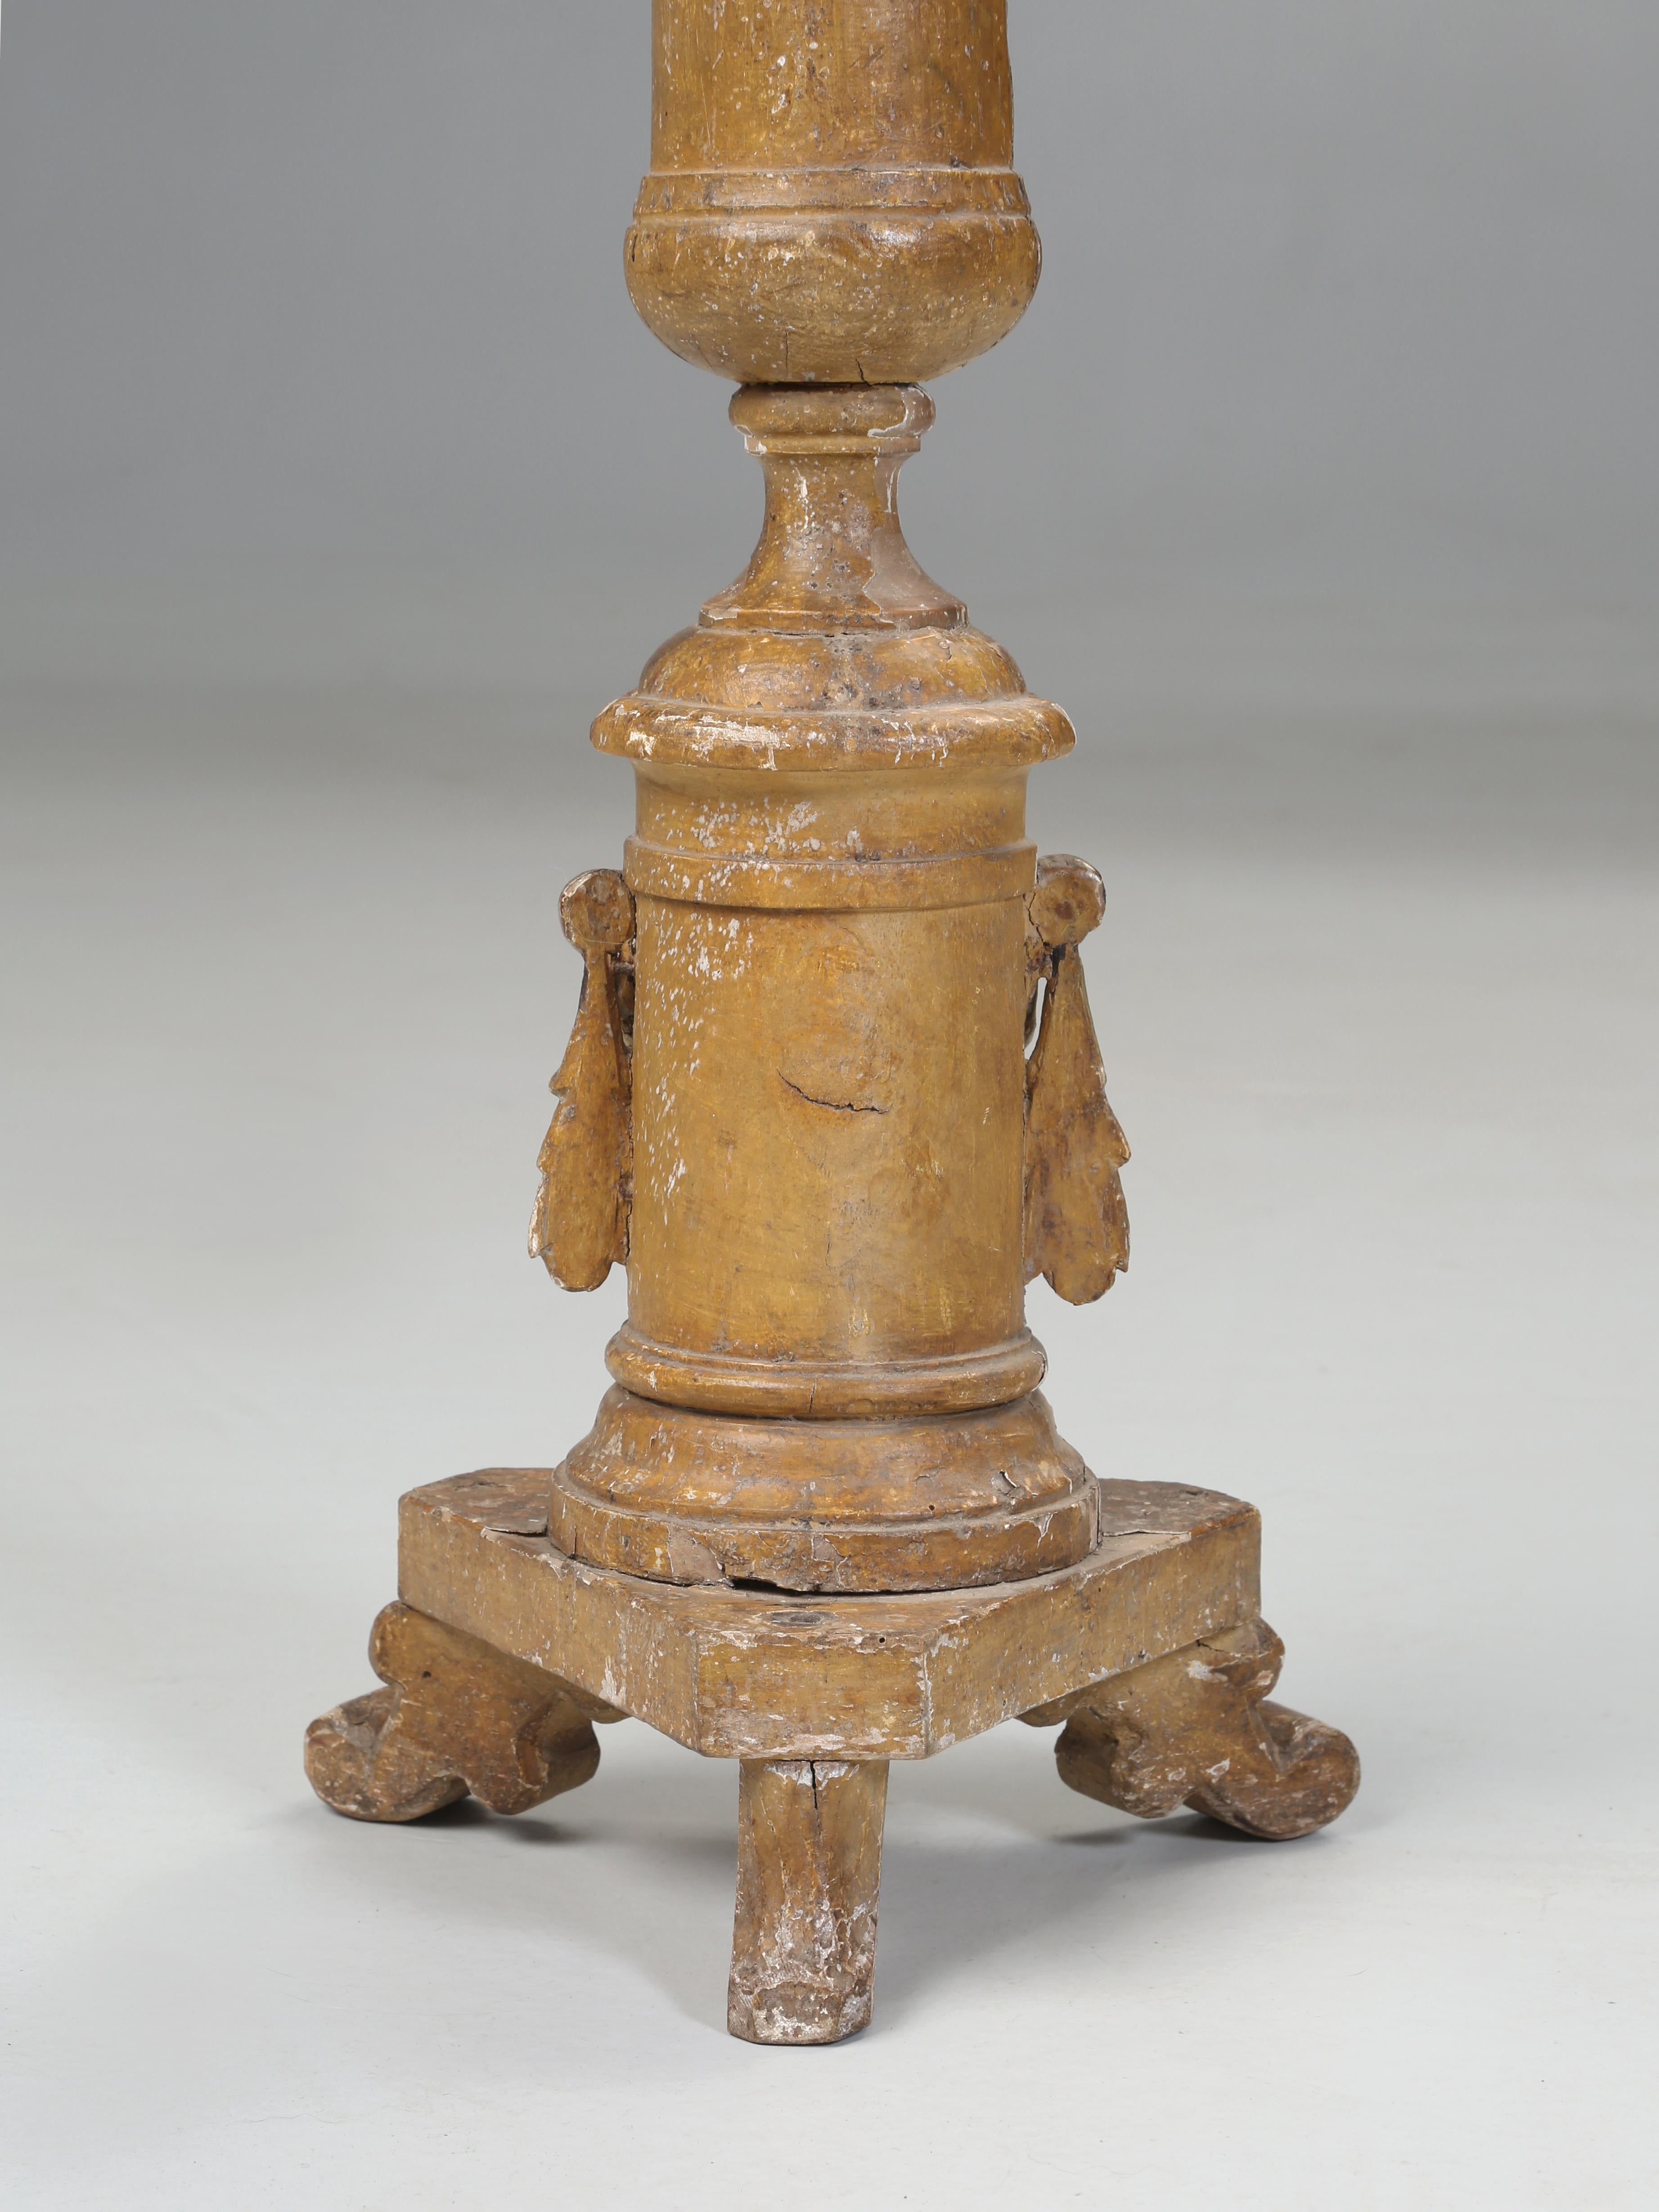 Italian Gilded Altar Candlestick Completely Original and Unrestored c1780-1820 For Sale 7